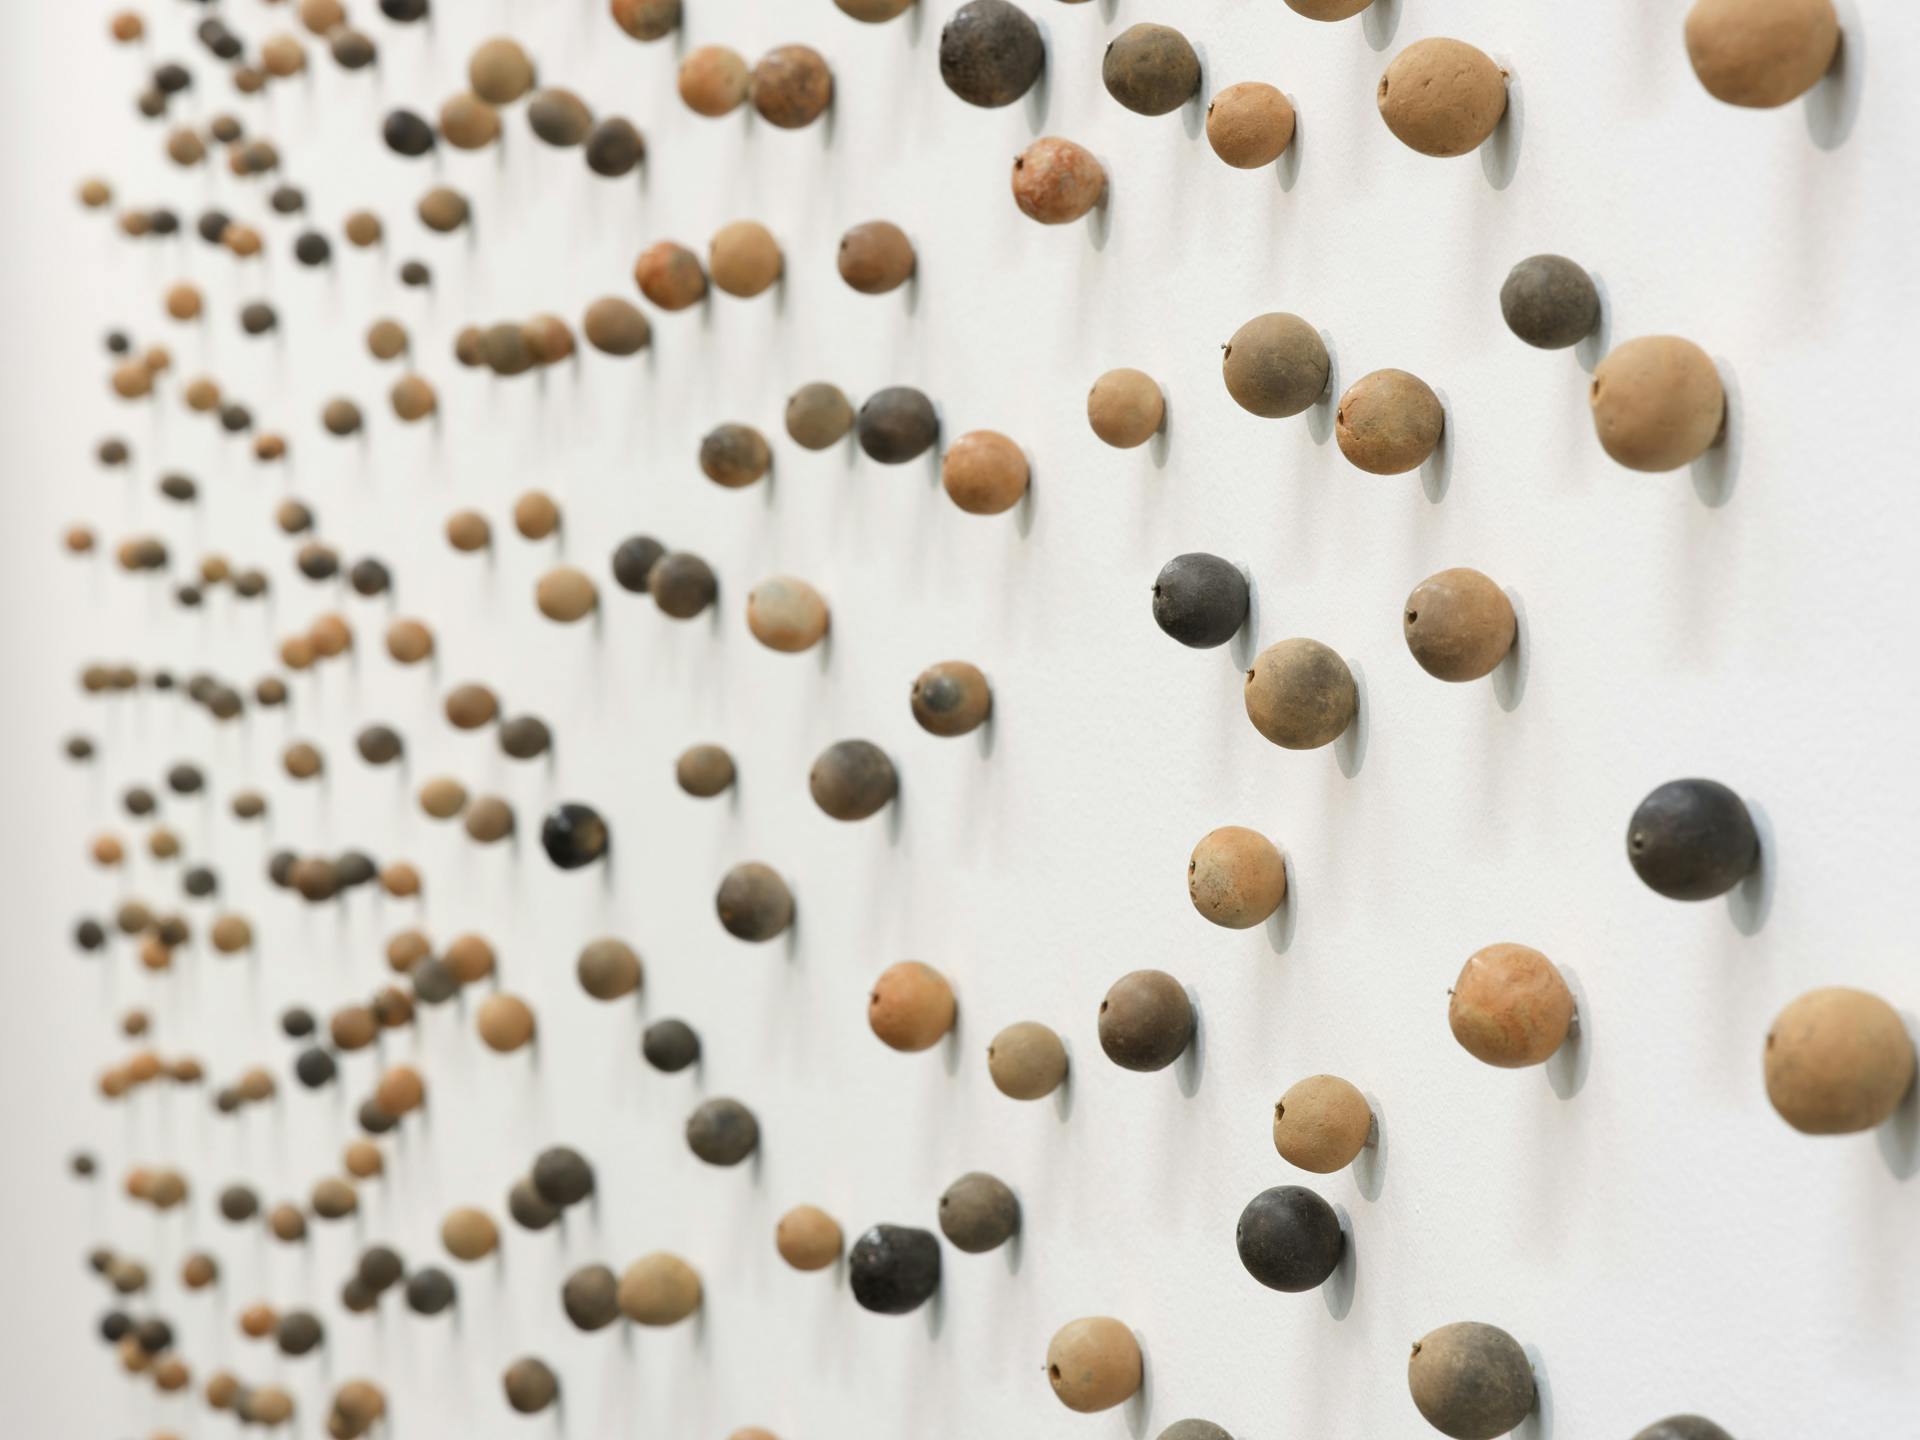 Hundreds of small clay beads of various colours are pinned to a white wall with varying distances between each bead.